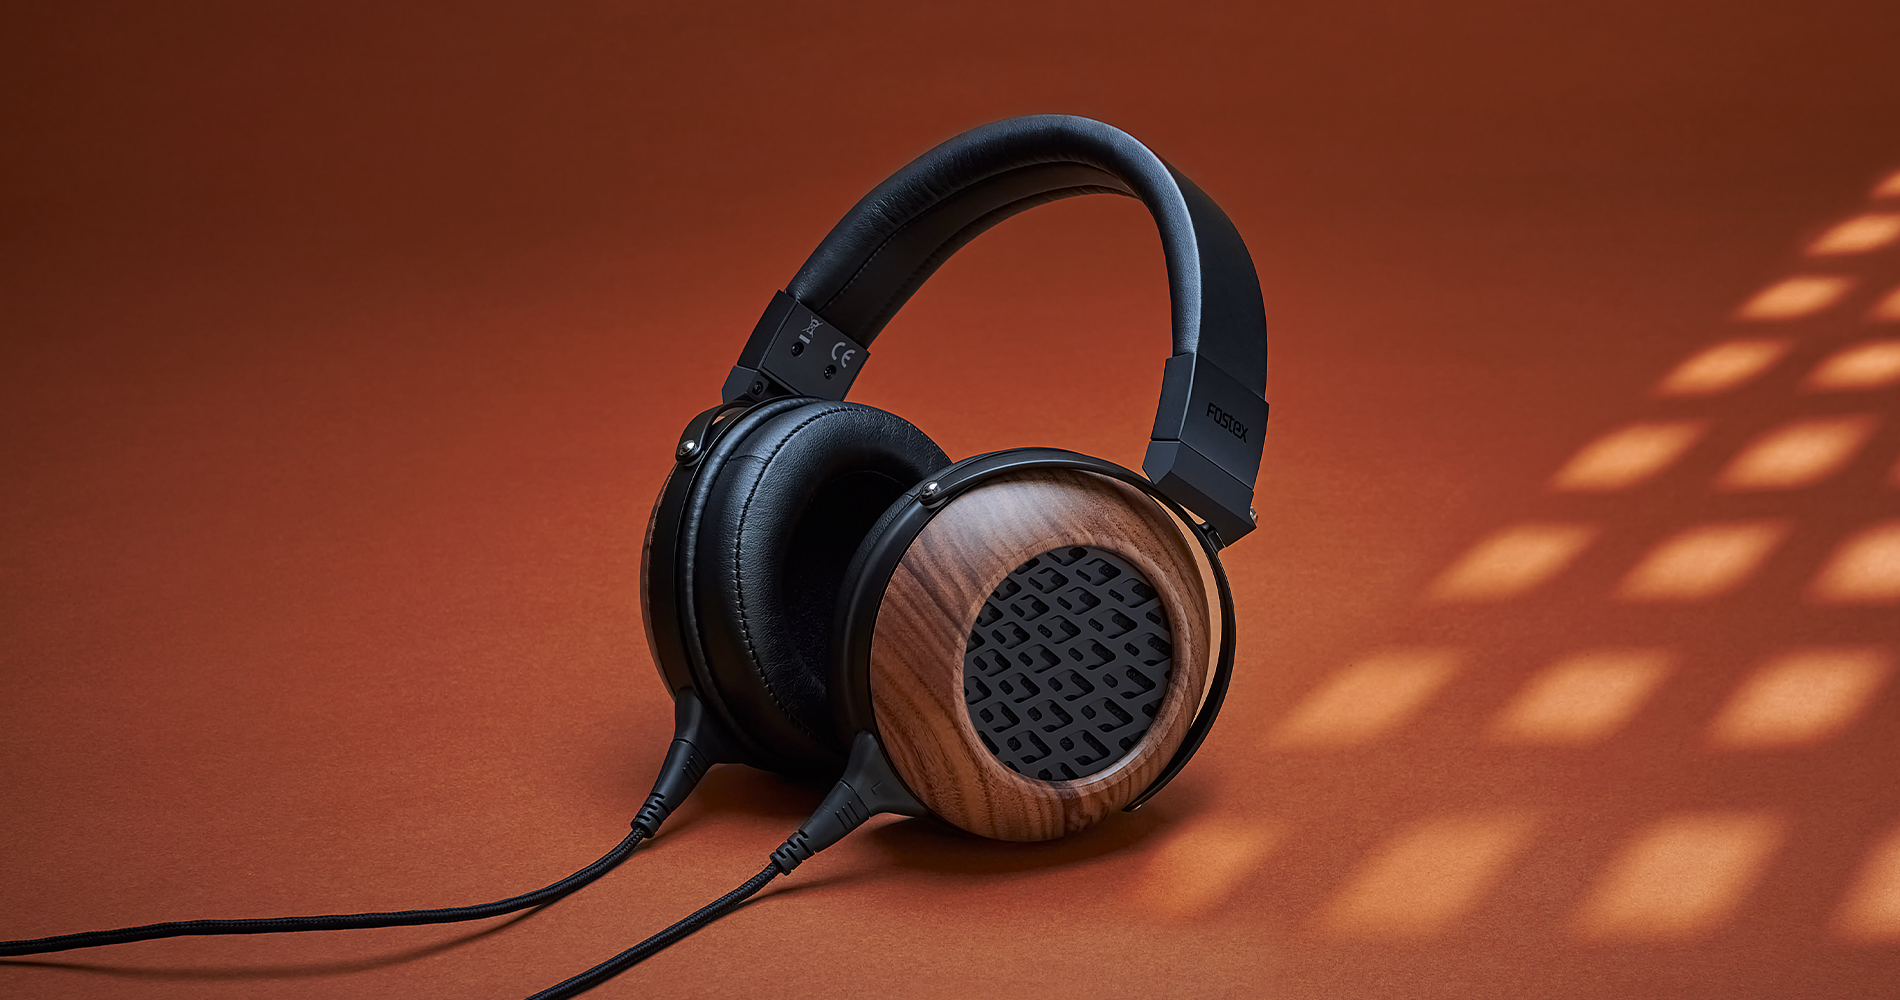 Fostex TH808 Premium Open-Back Dynamic Headphones Overview